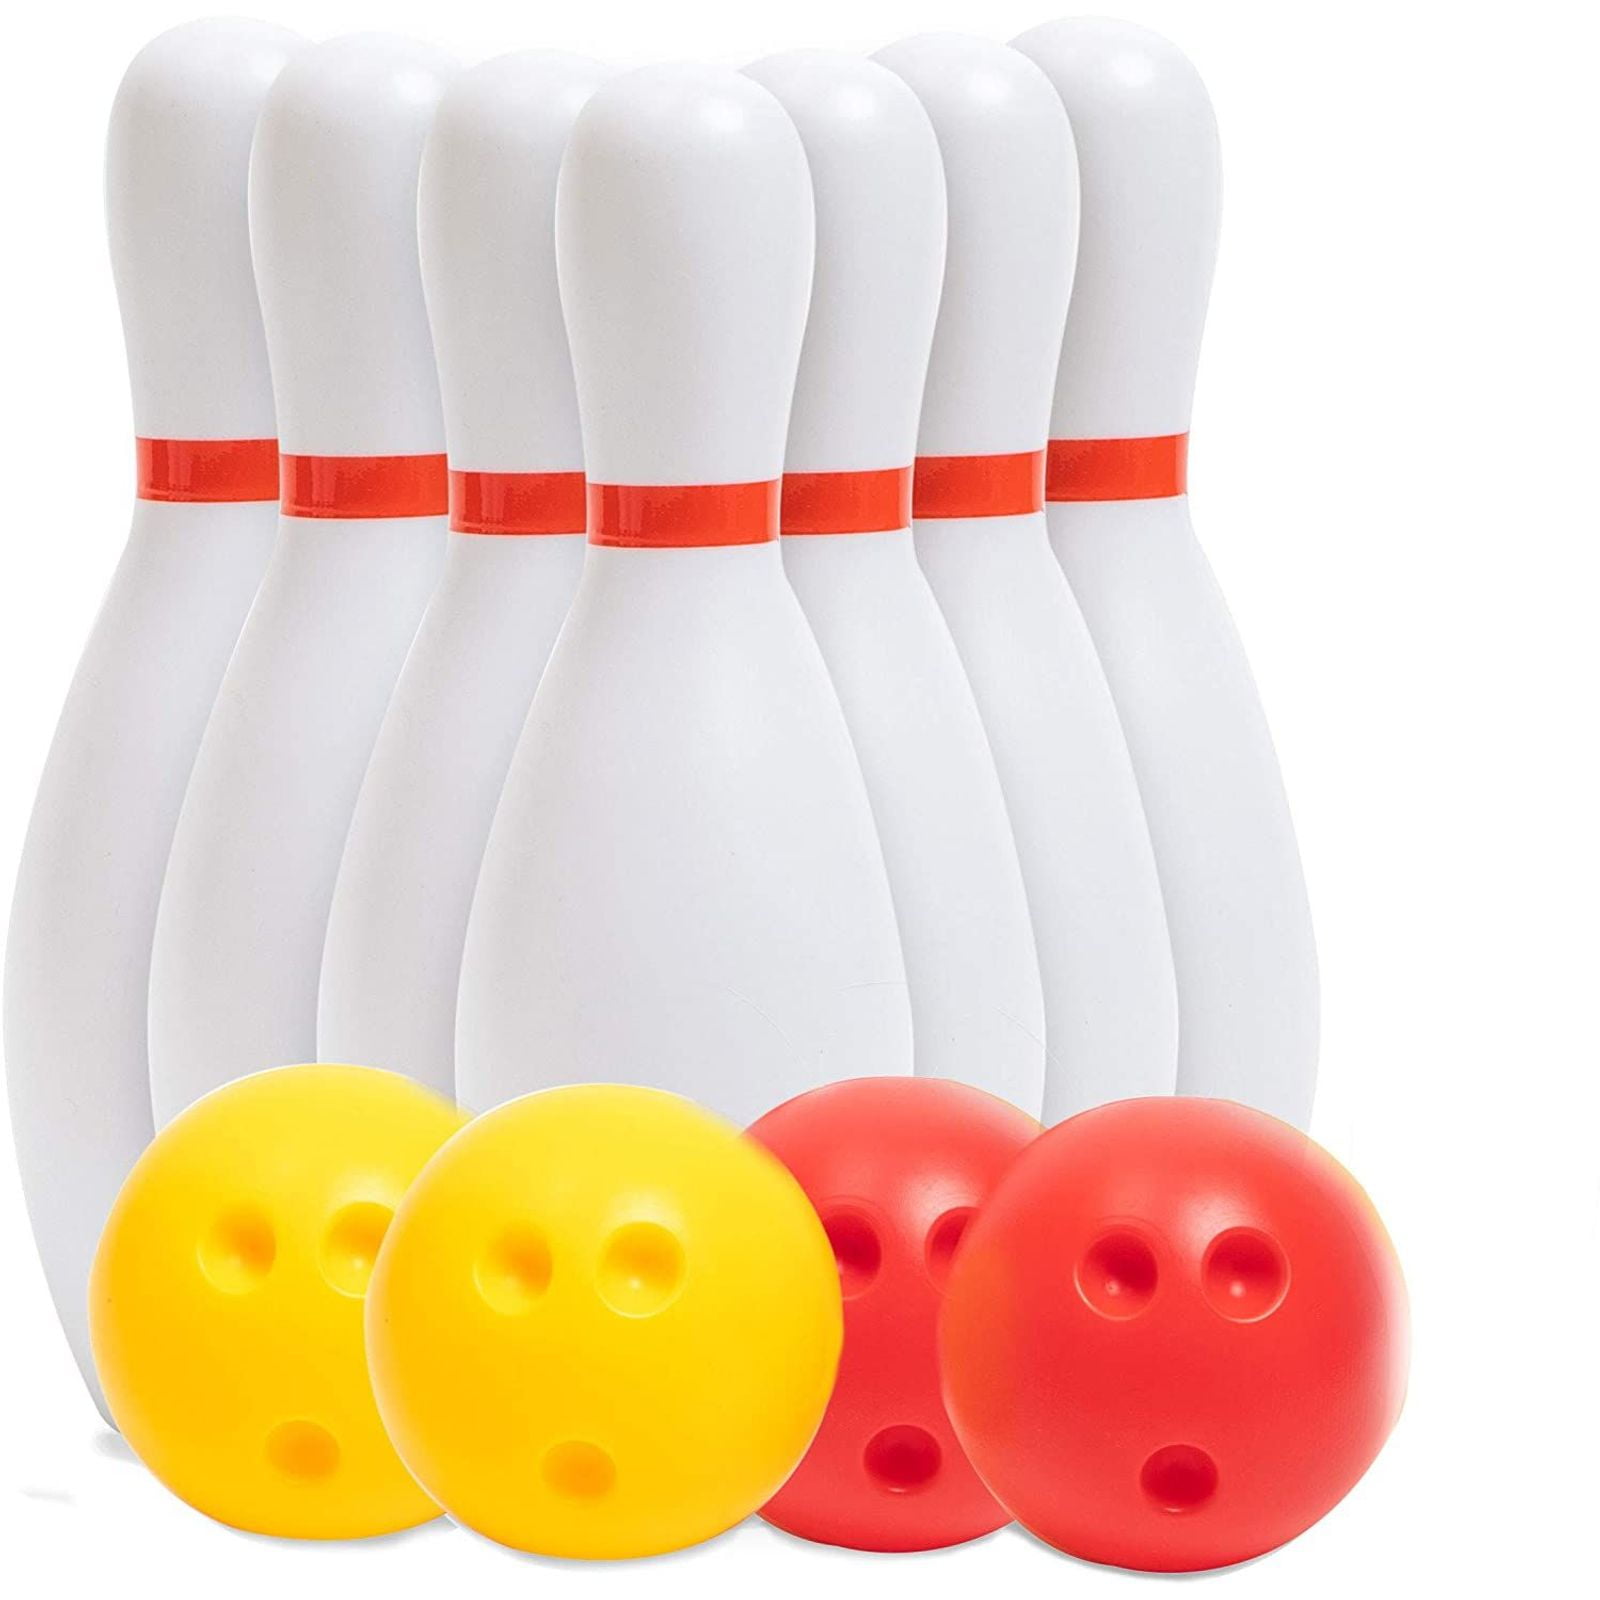 UNIQUE KIDS Bowling Set for Toddlers Outside Games or Indoor Toy for Kids Gifts for 3 4 5 6 Year Olds Children Boys & Girls Sports Toy Active Game for Birthday Party Fun Eductional Games 